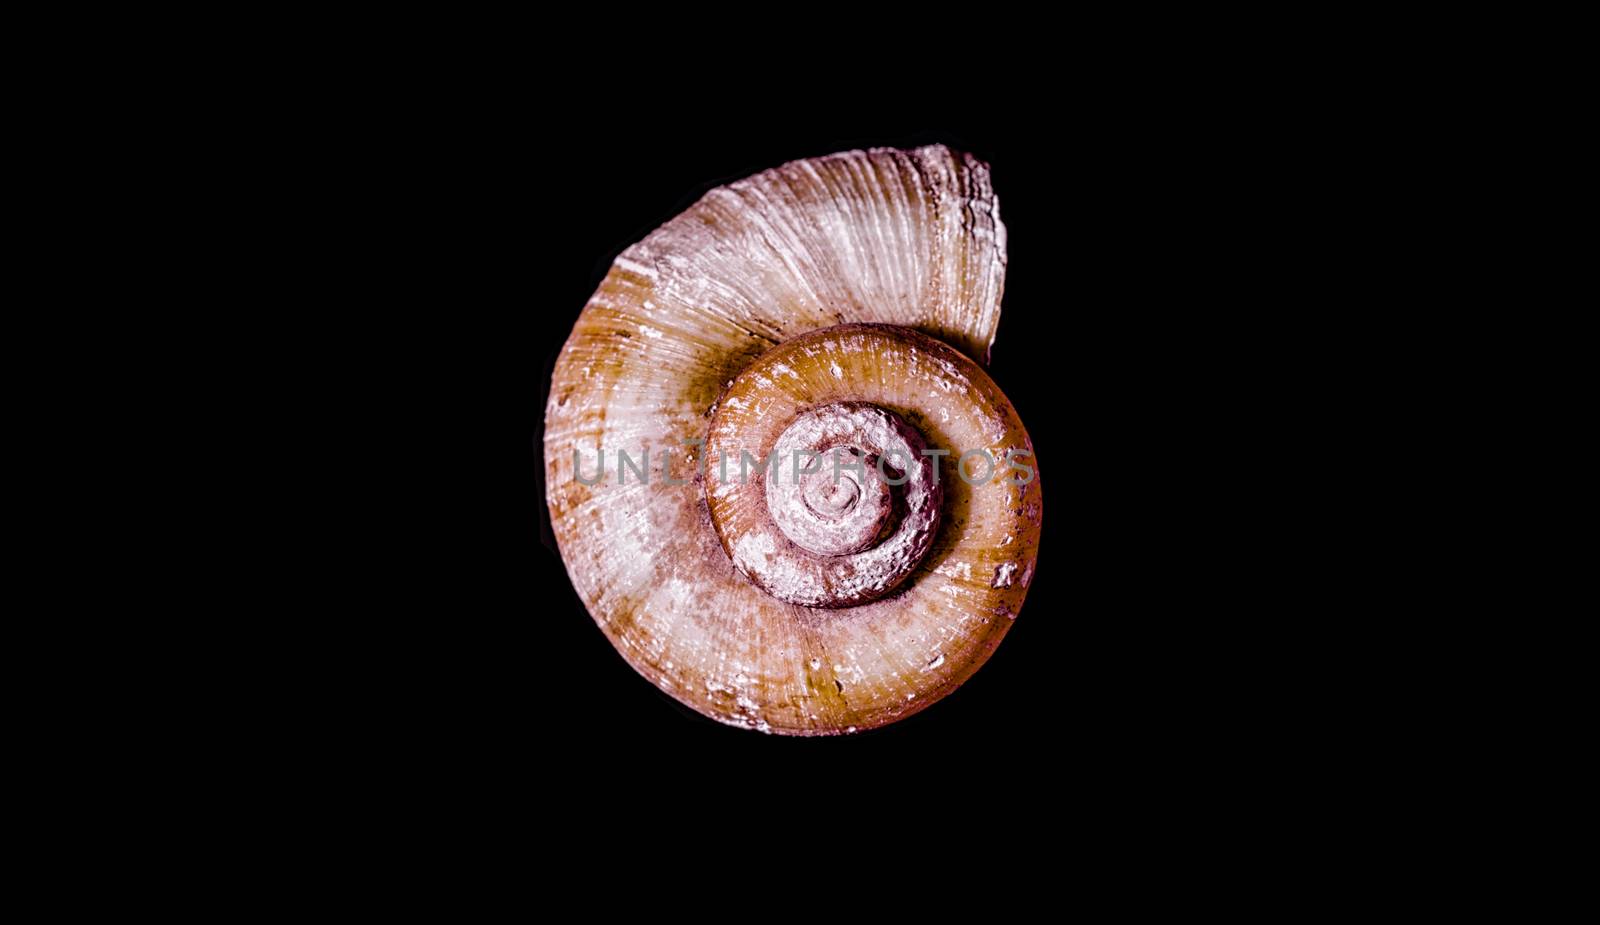 ocean shell on black background by Gera8th